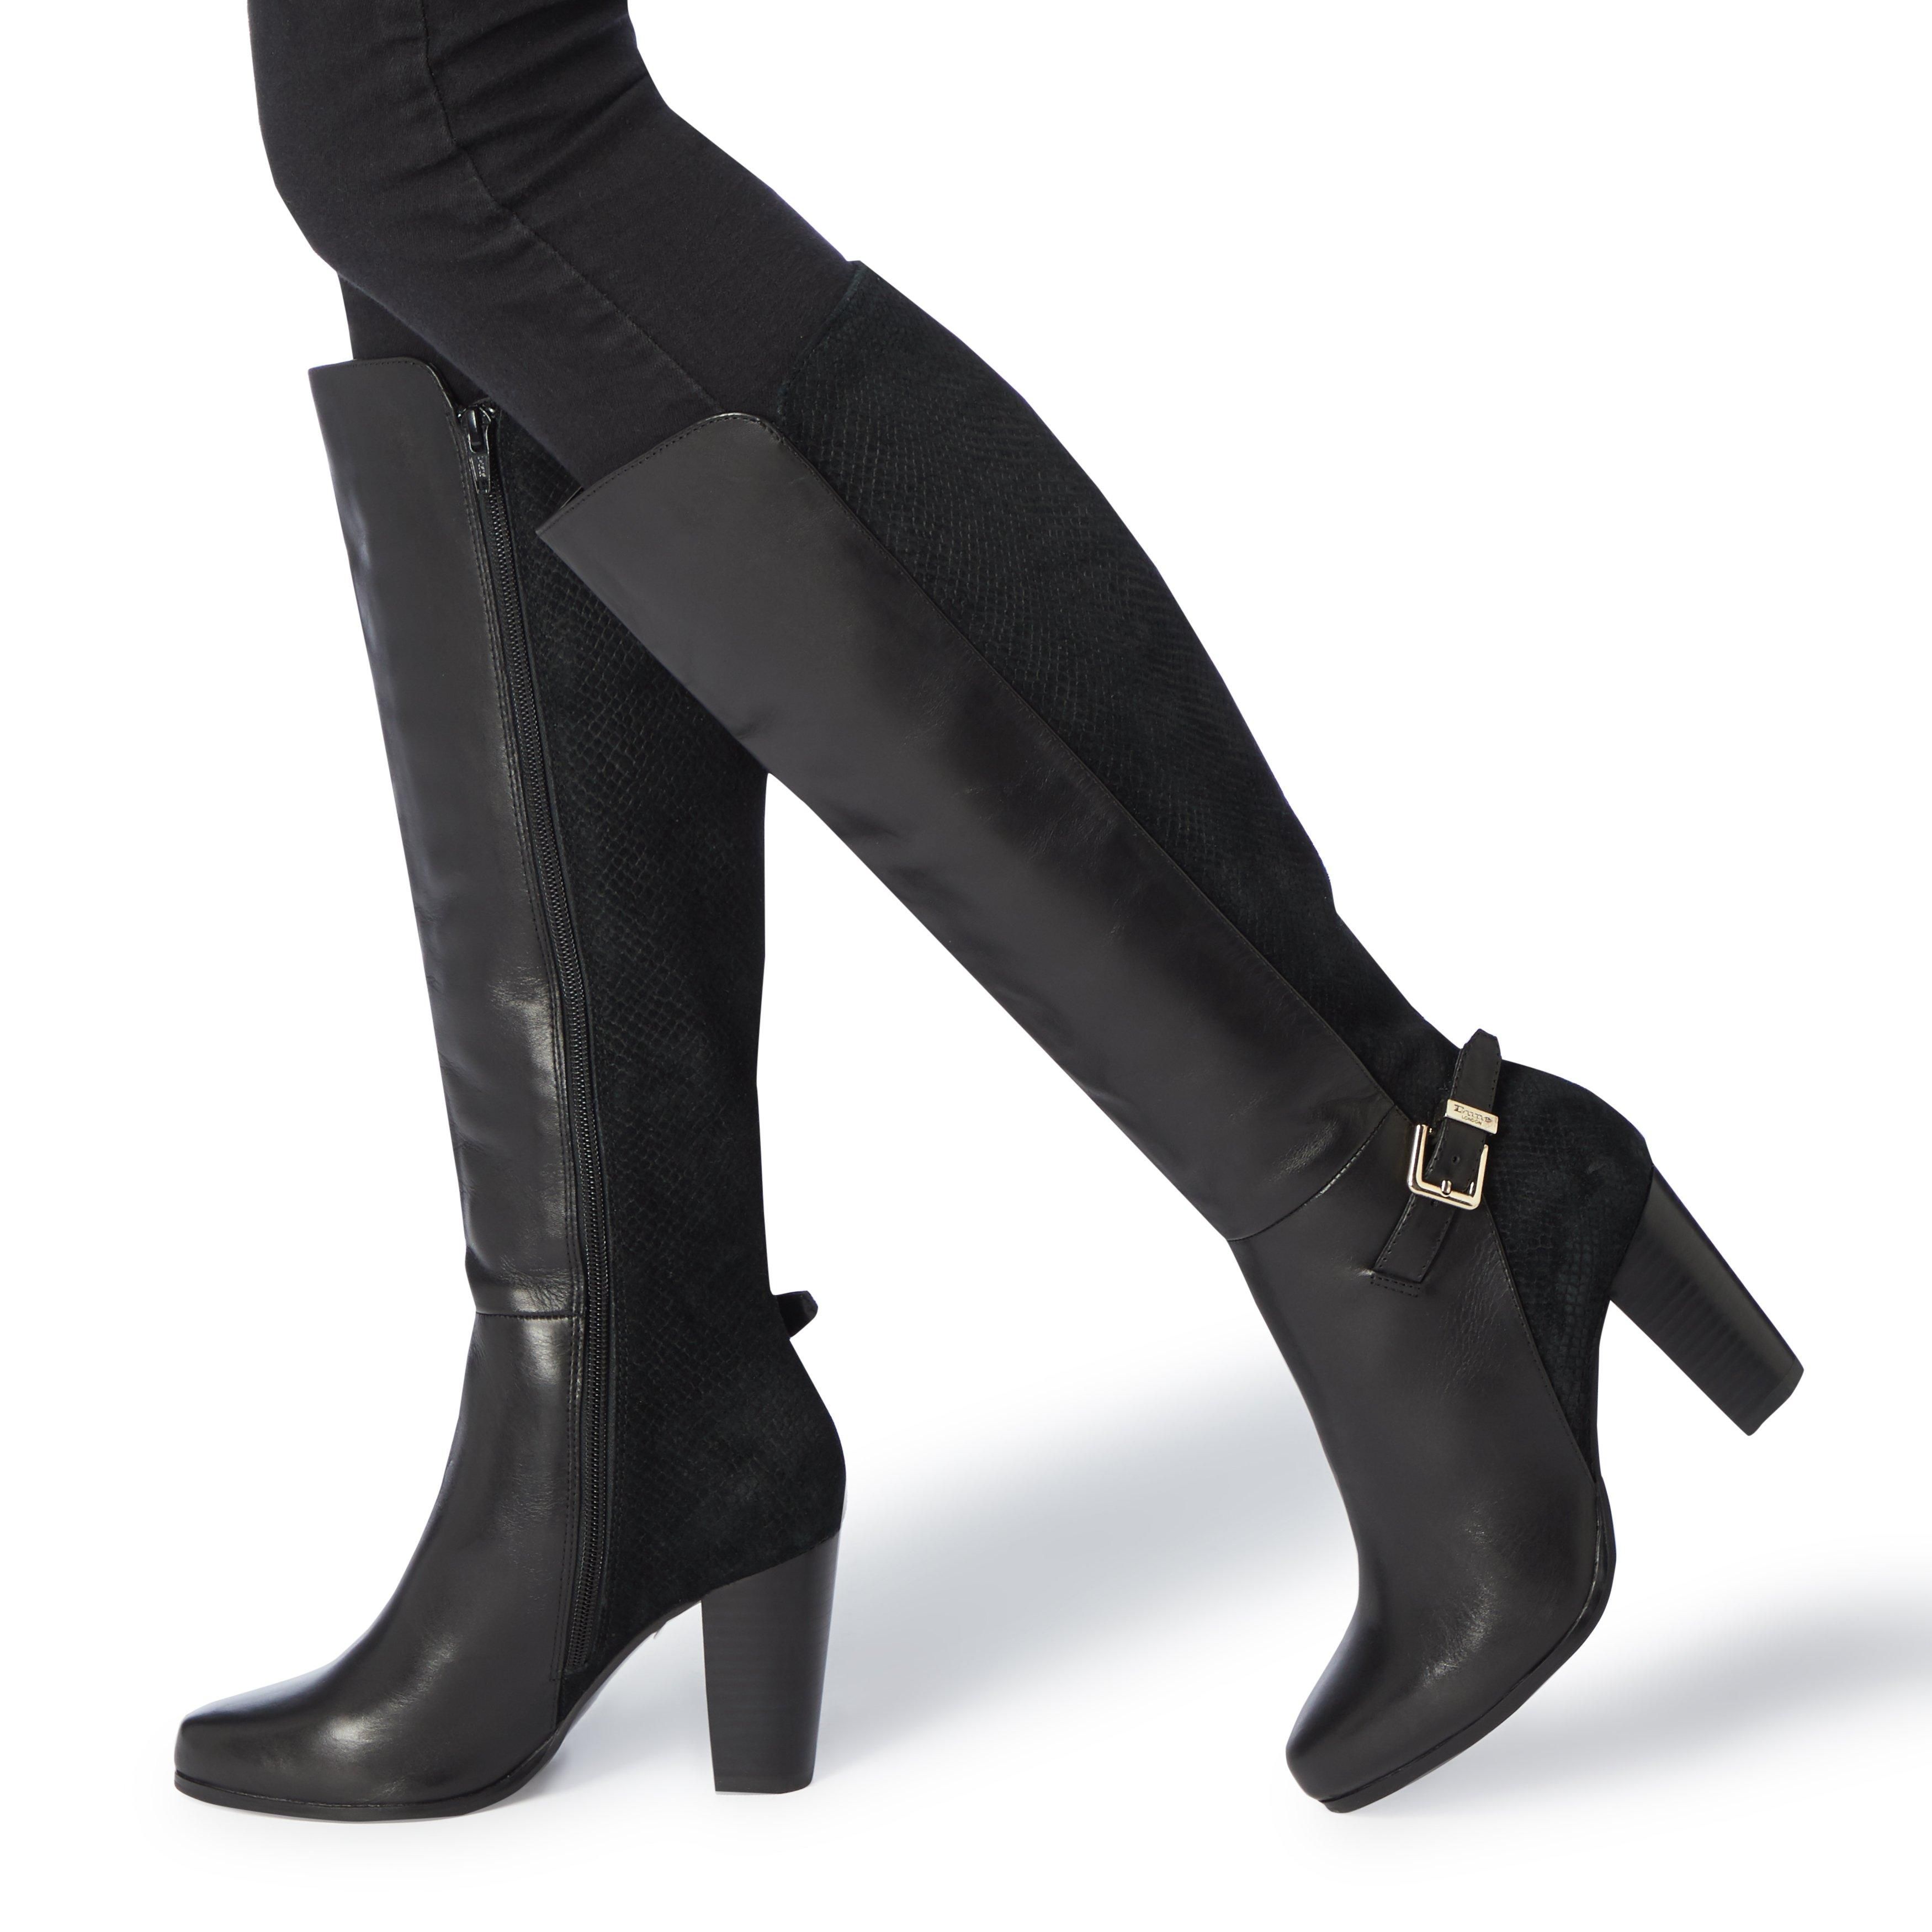 This Dune London Samuella knee high boot is a stunning daywear style. Featuring an almond toe, buckle strap trim and a high chunky heel. A side zip closure completes this ultra versatile mixed fabric design.